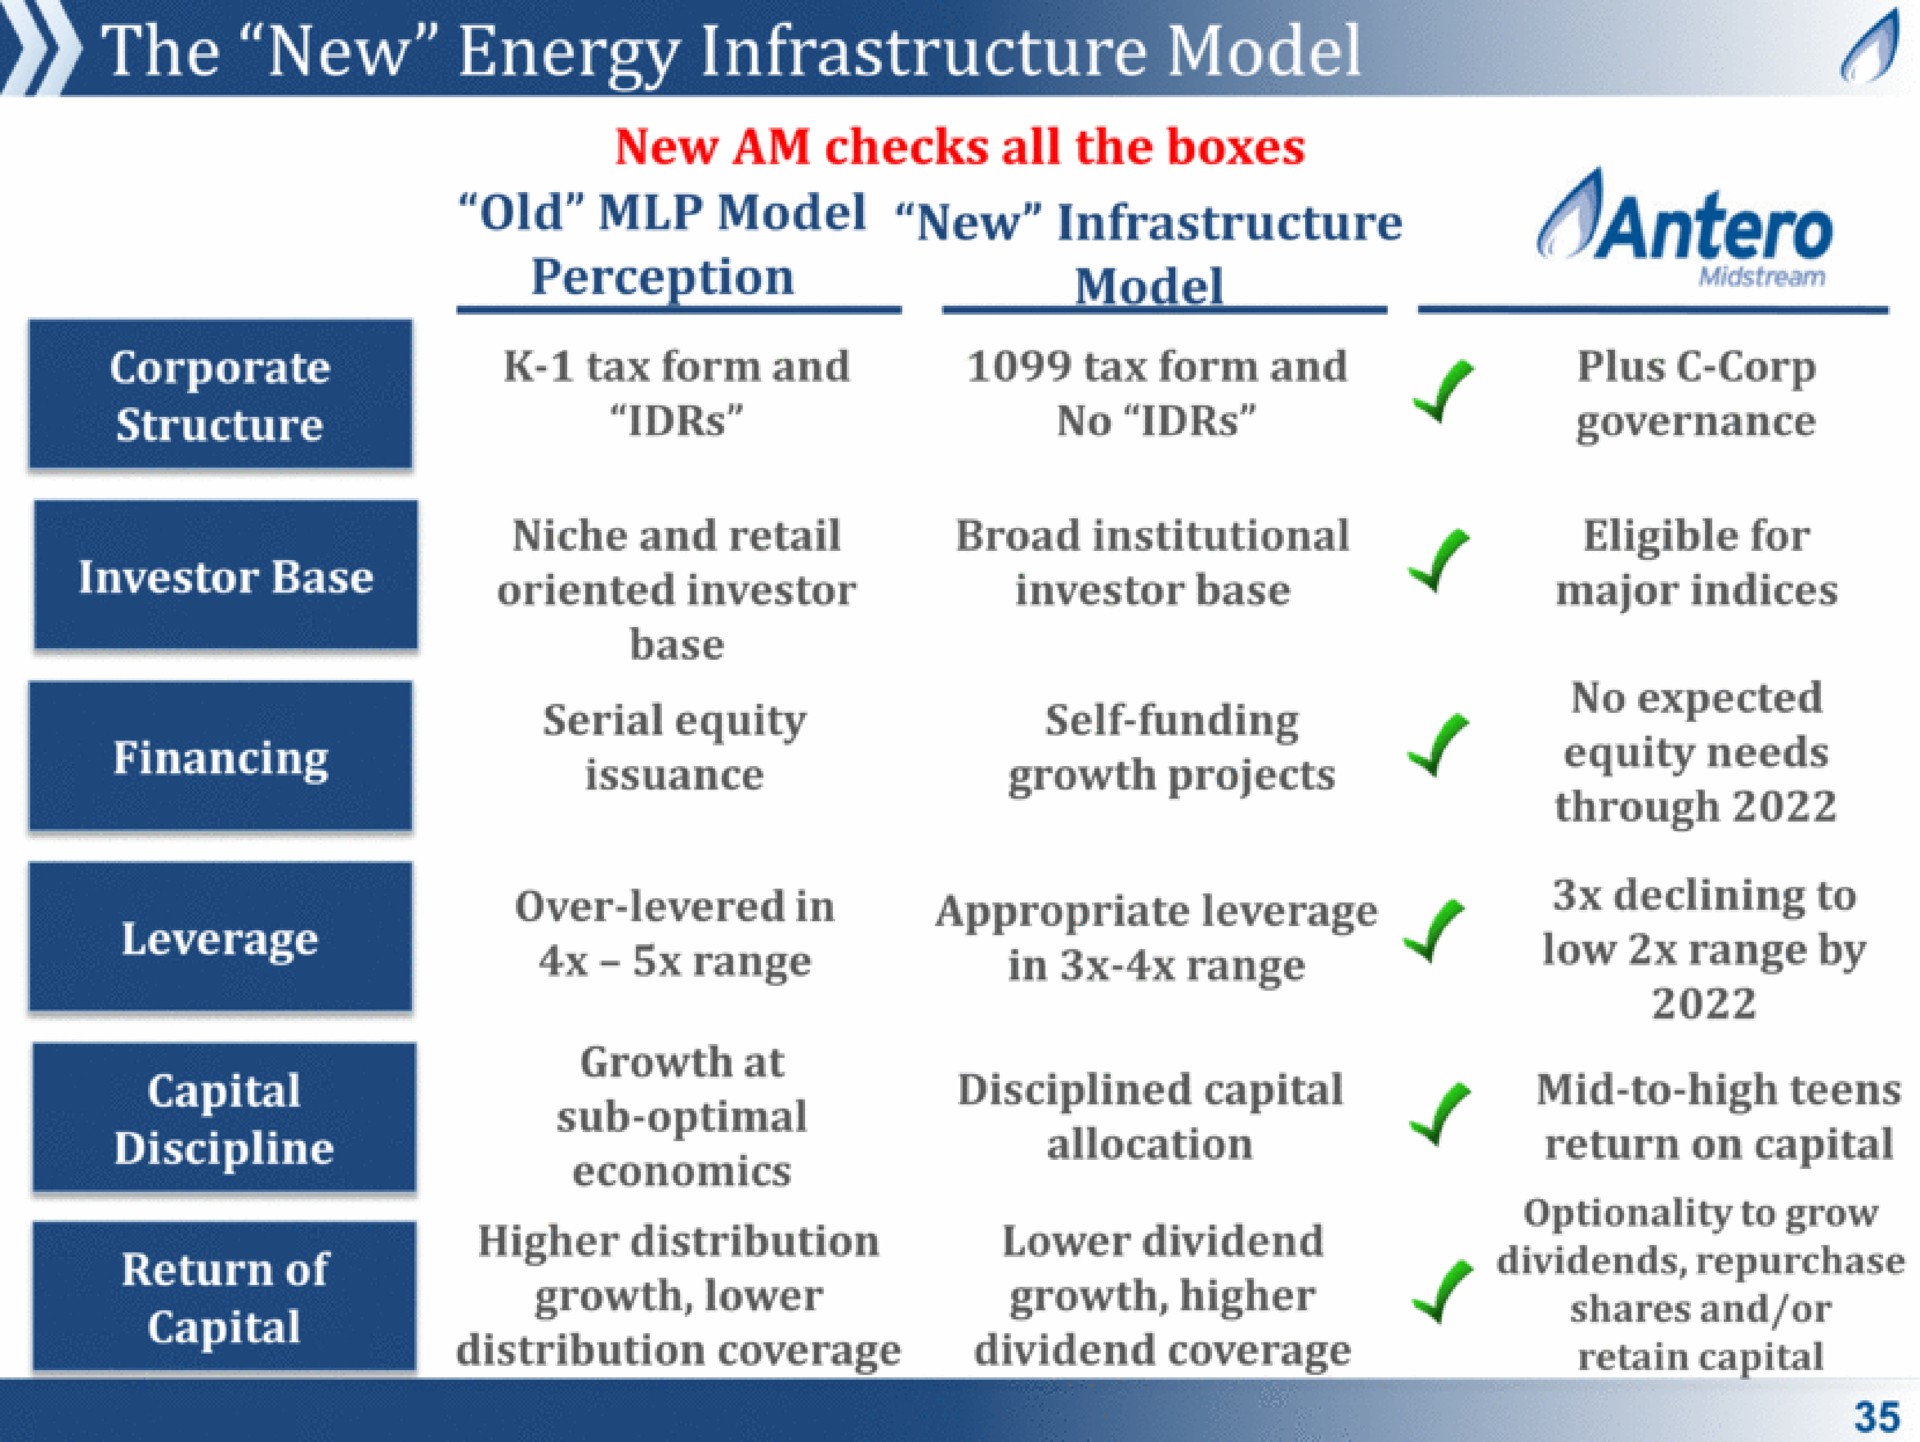 the new energy infrastructure model a old model new infrastructure distribution coverage dividend coverage retain capital | Antero Midstream Partners